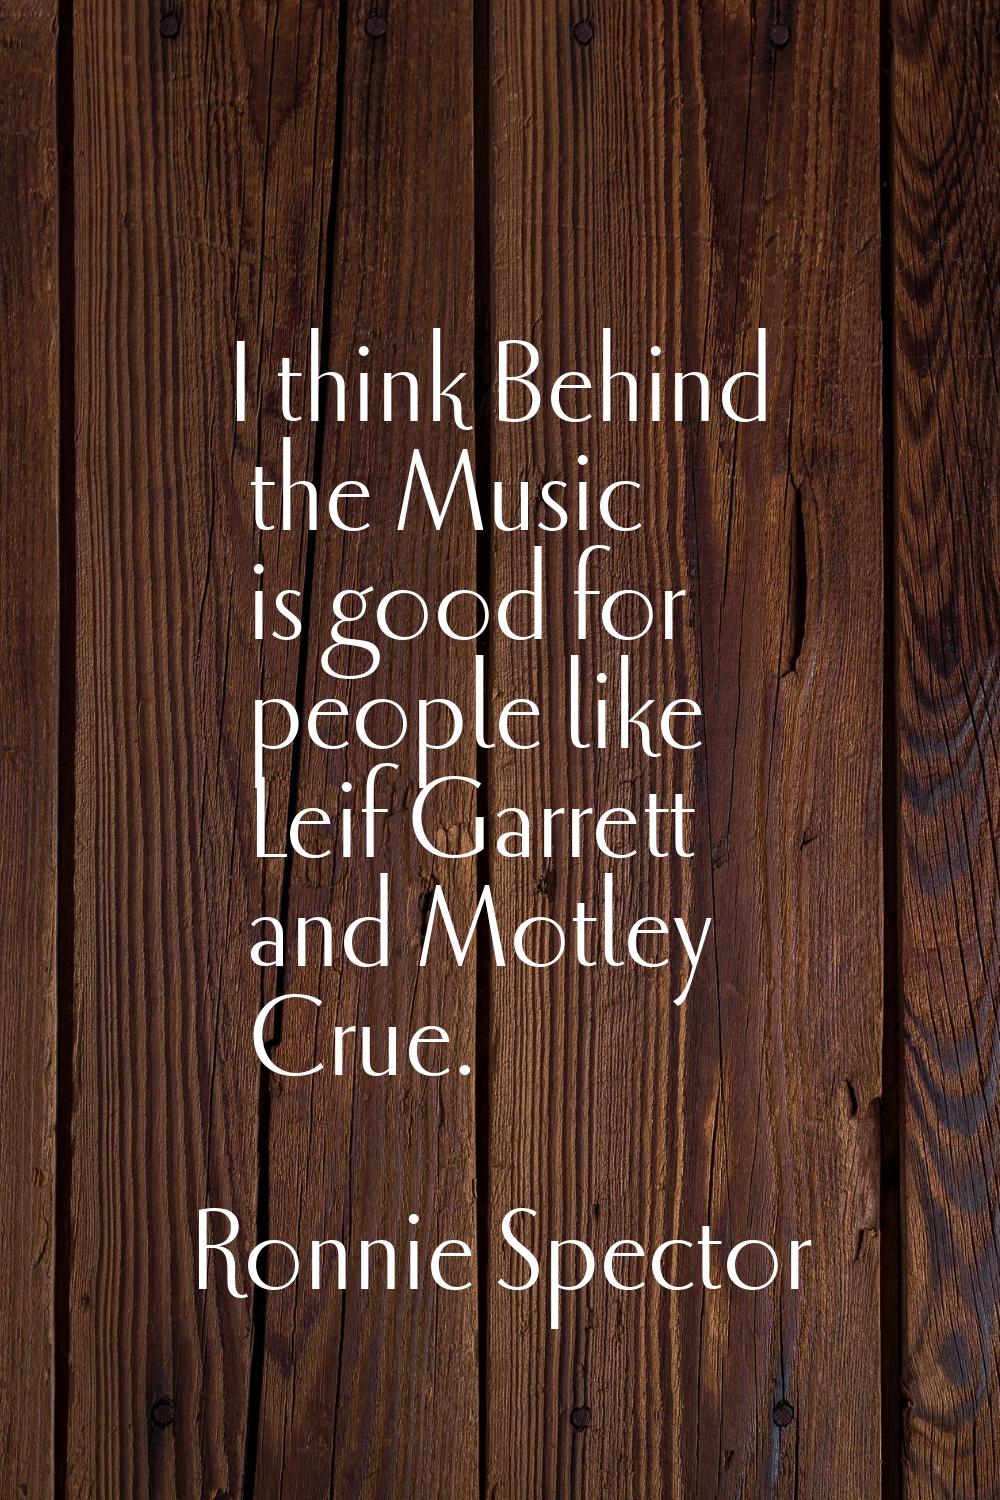 I think Behind the Music is good for people like Leif Garrett and Motley Crue.